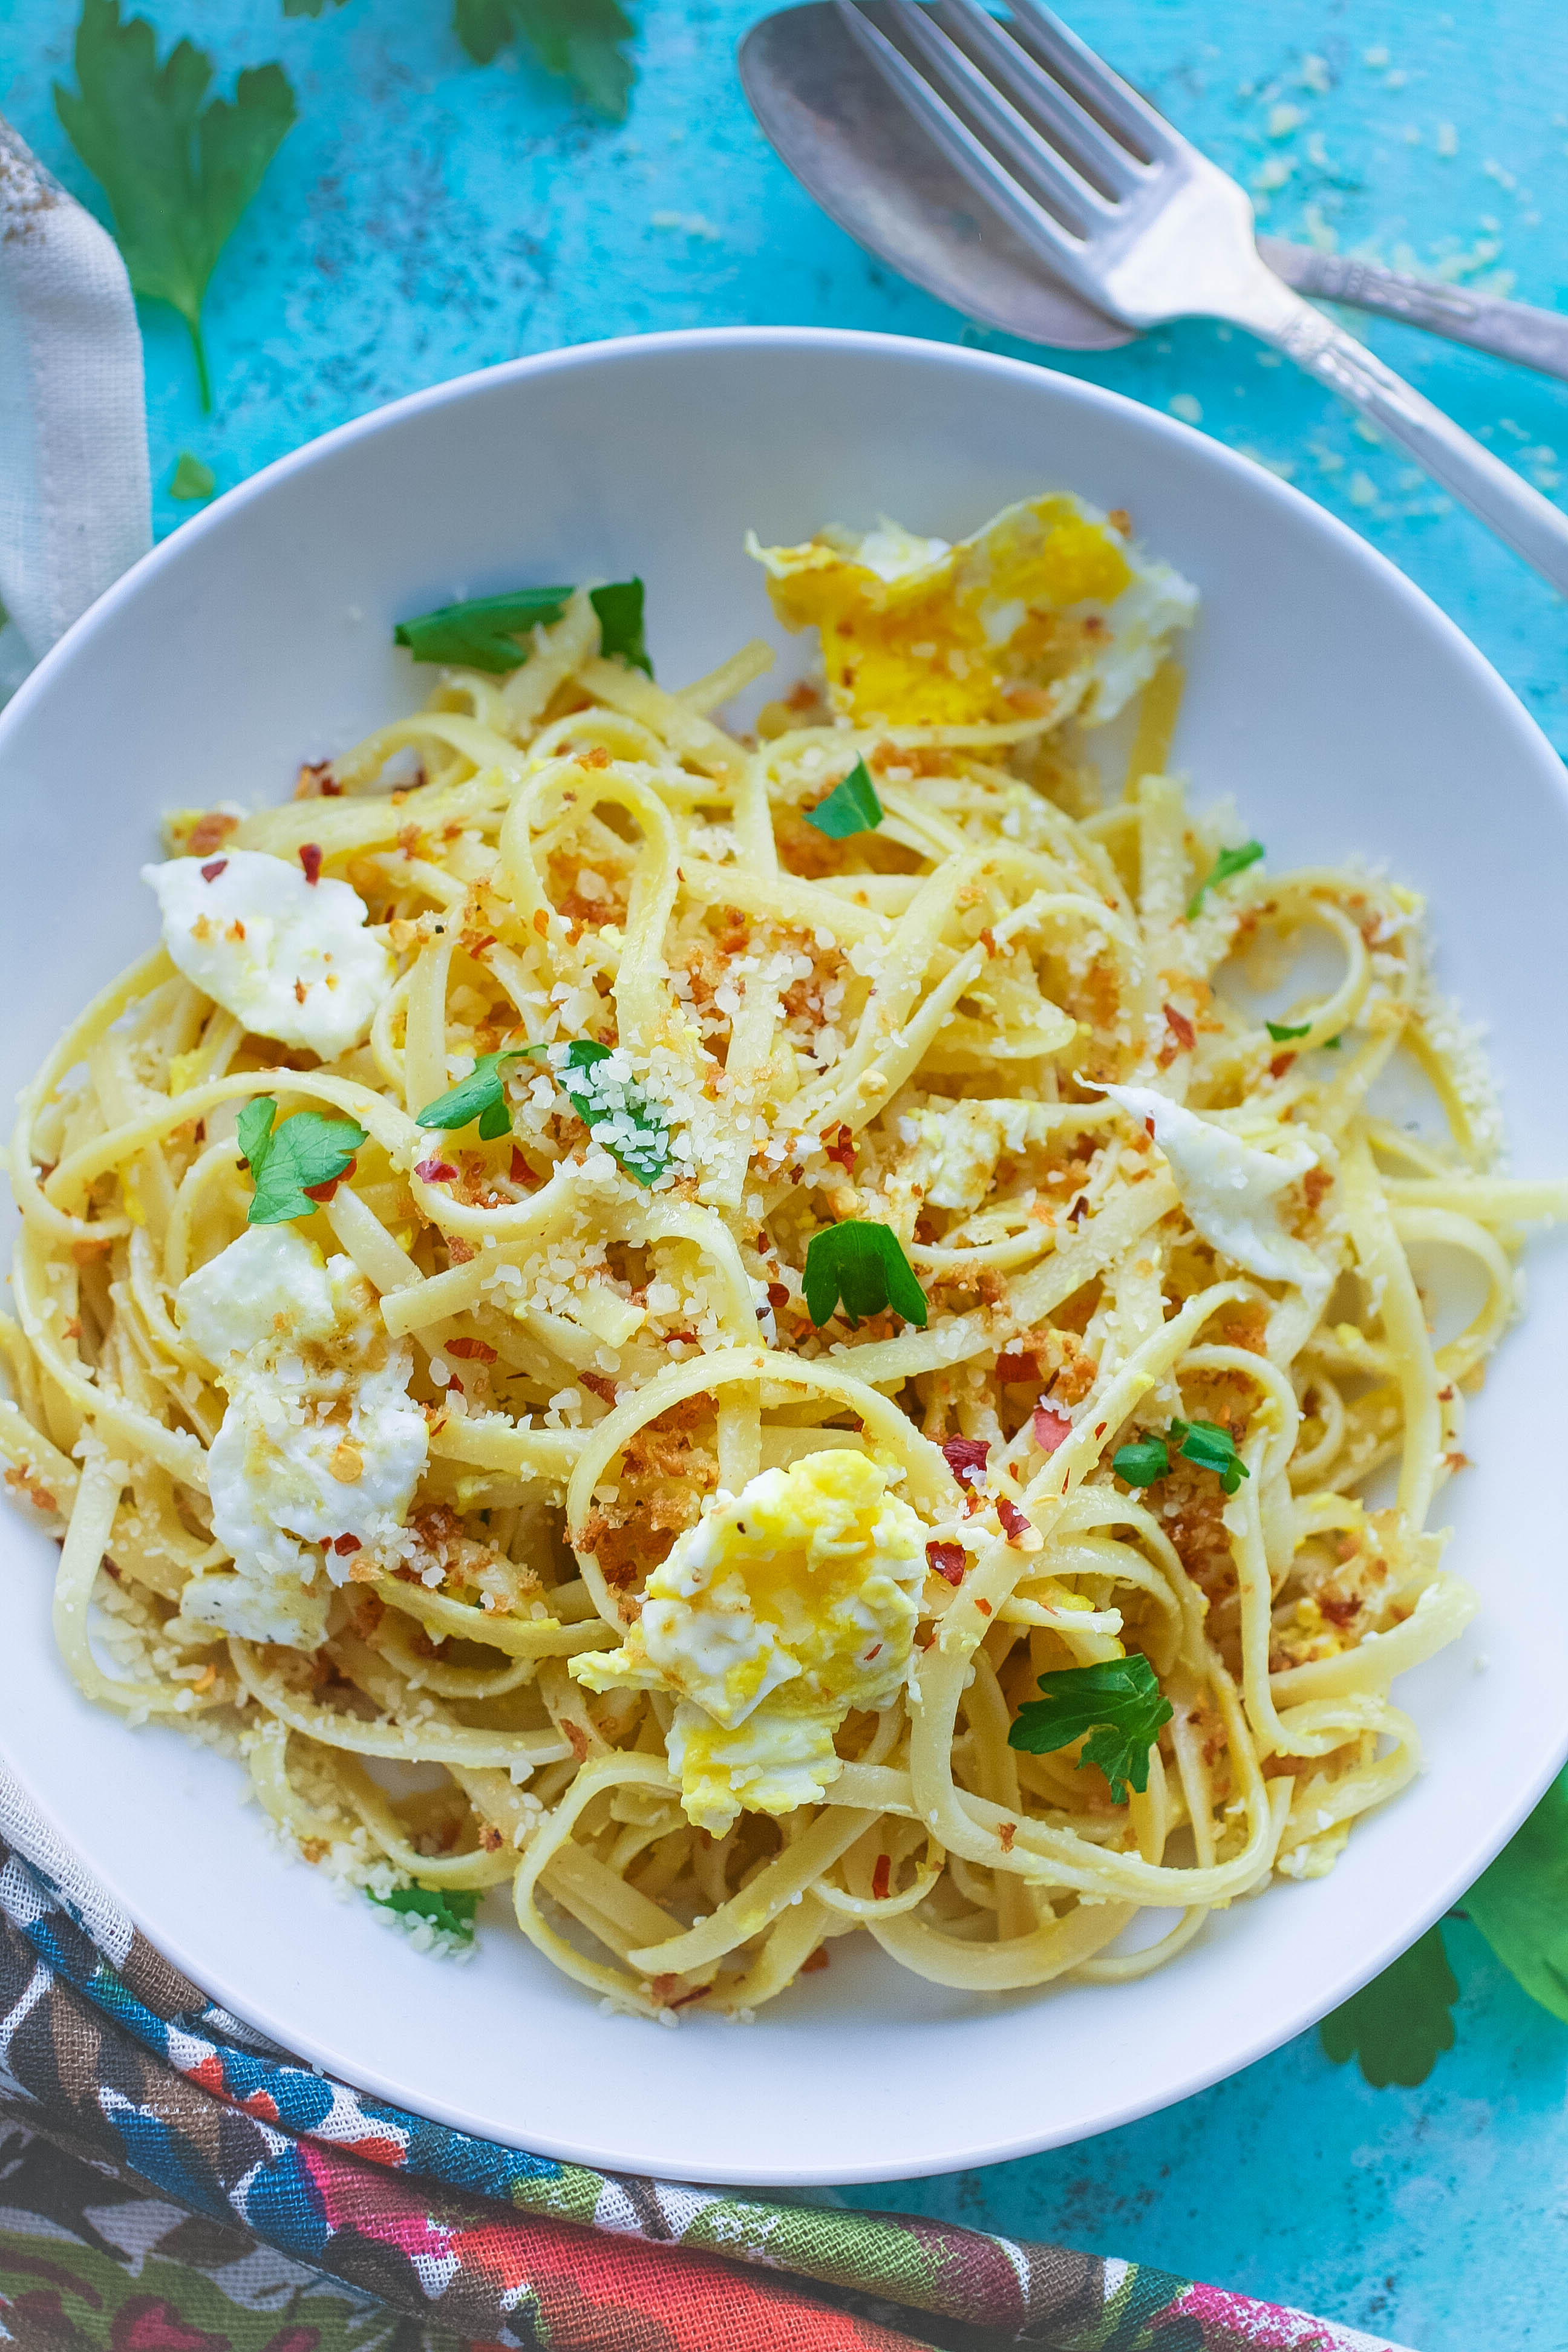 Spaghetti with Fried Eggs and Crunchy Breadcrumbs is a simple dish you'll enjoy. Spaghetti with Fried Eggs and Crunchy Breadcrumbs is a meatless and easy-to-make dish you'll love.